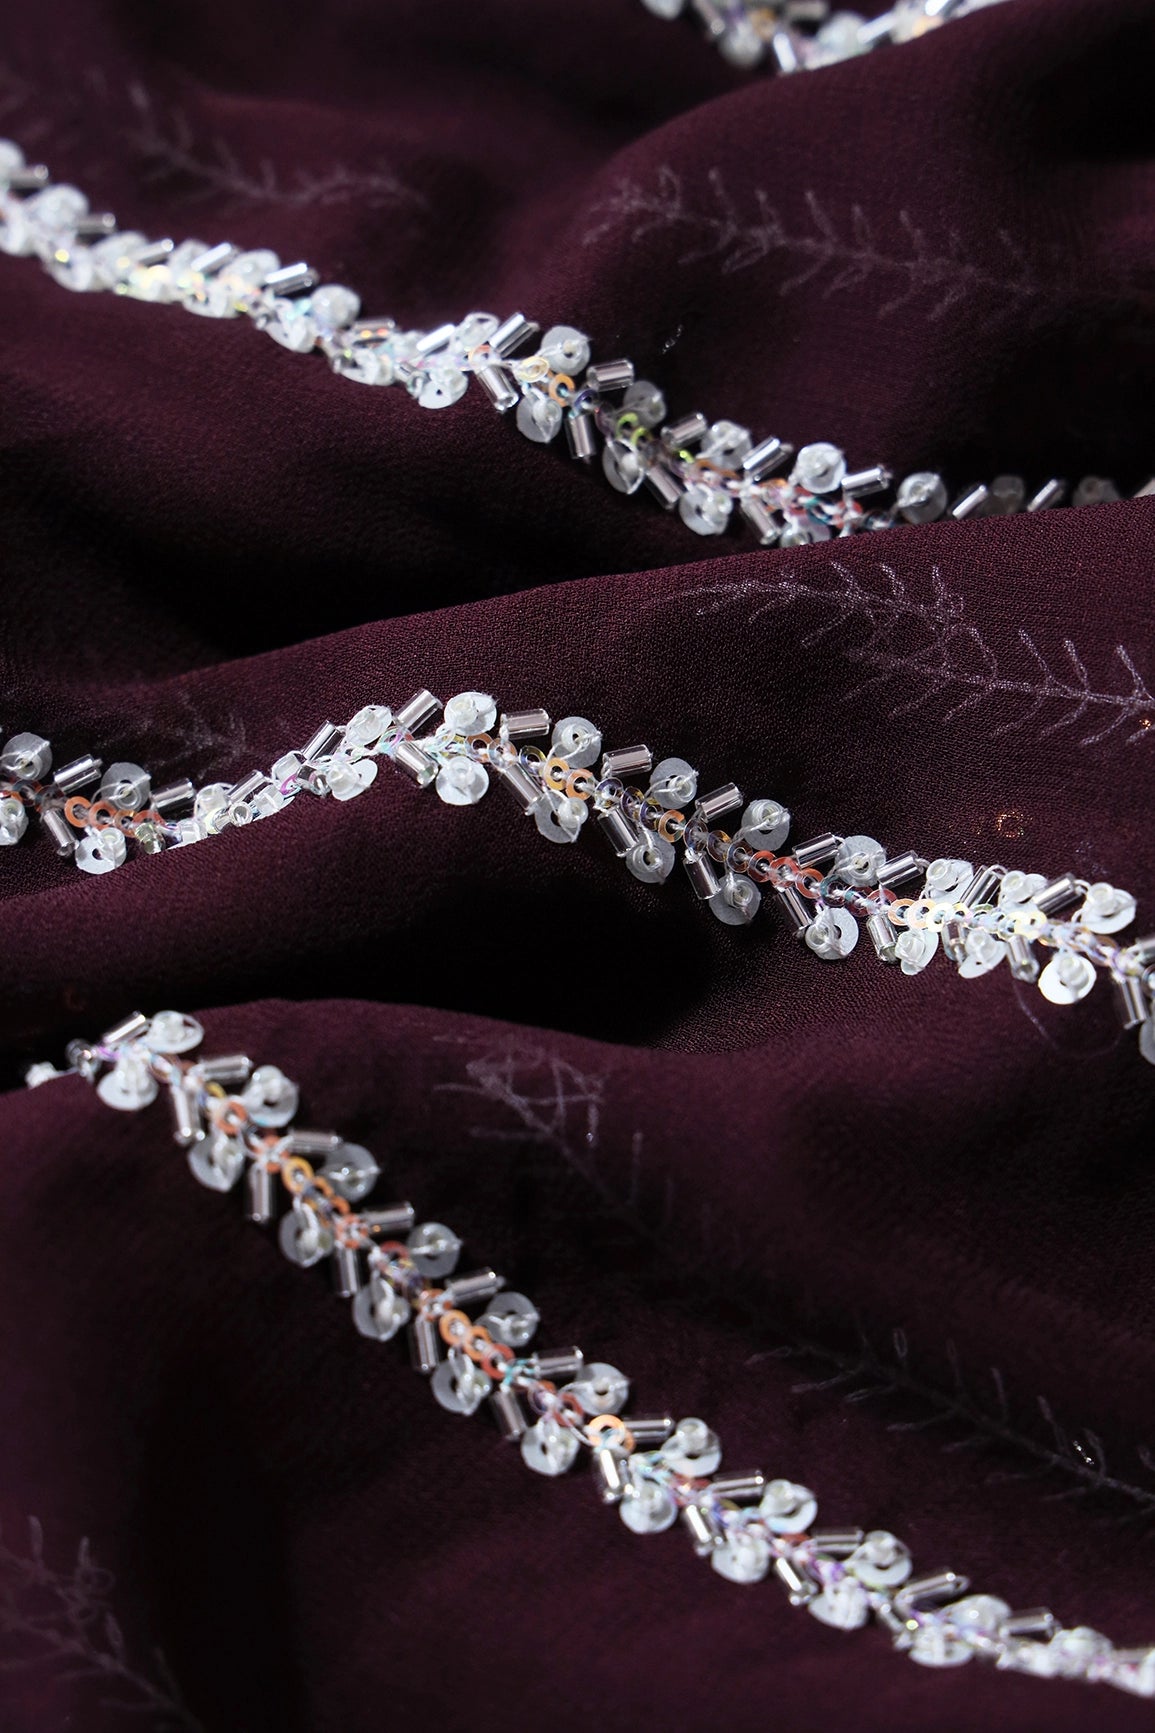 Silver Beads With Sequins Beautiful Stripes Handwork Embroidery On Wine Viscose Georgette Fabric